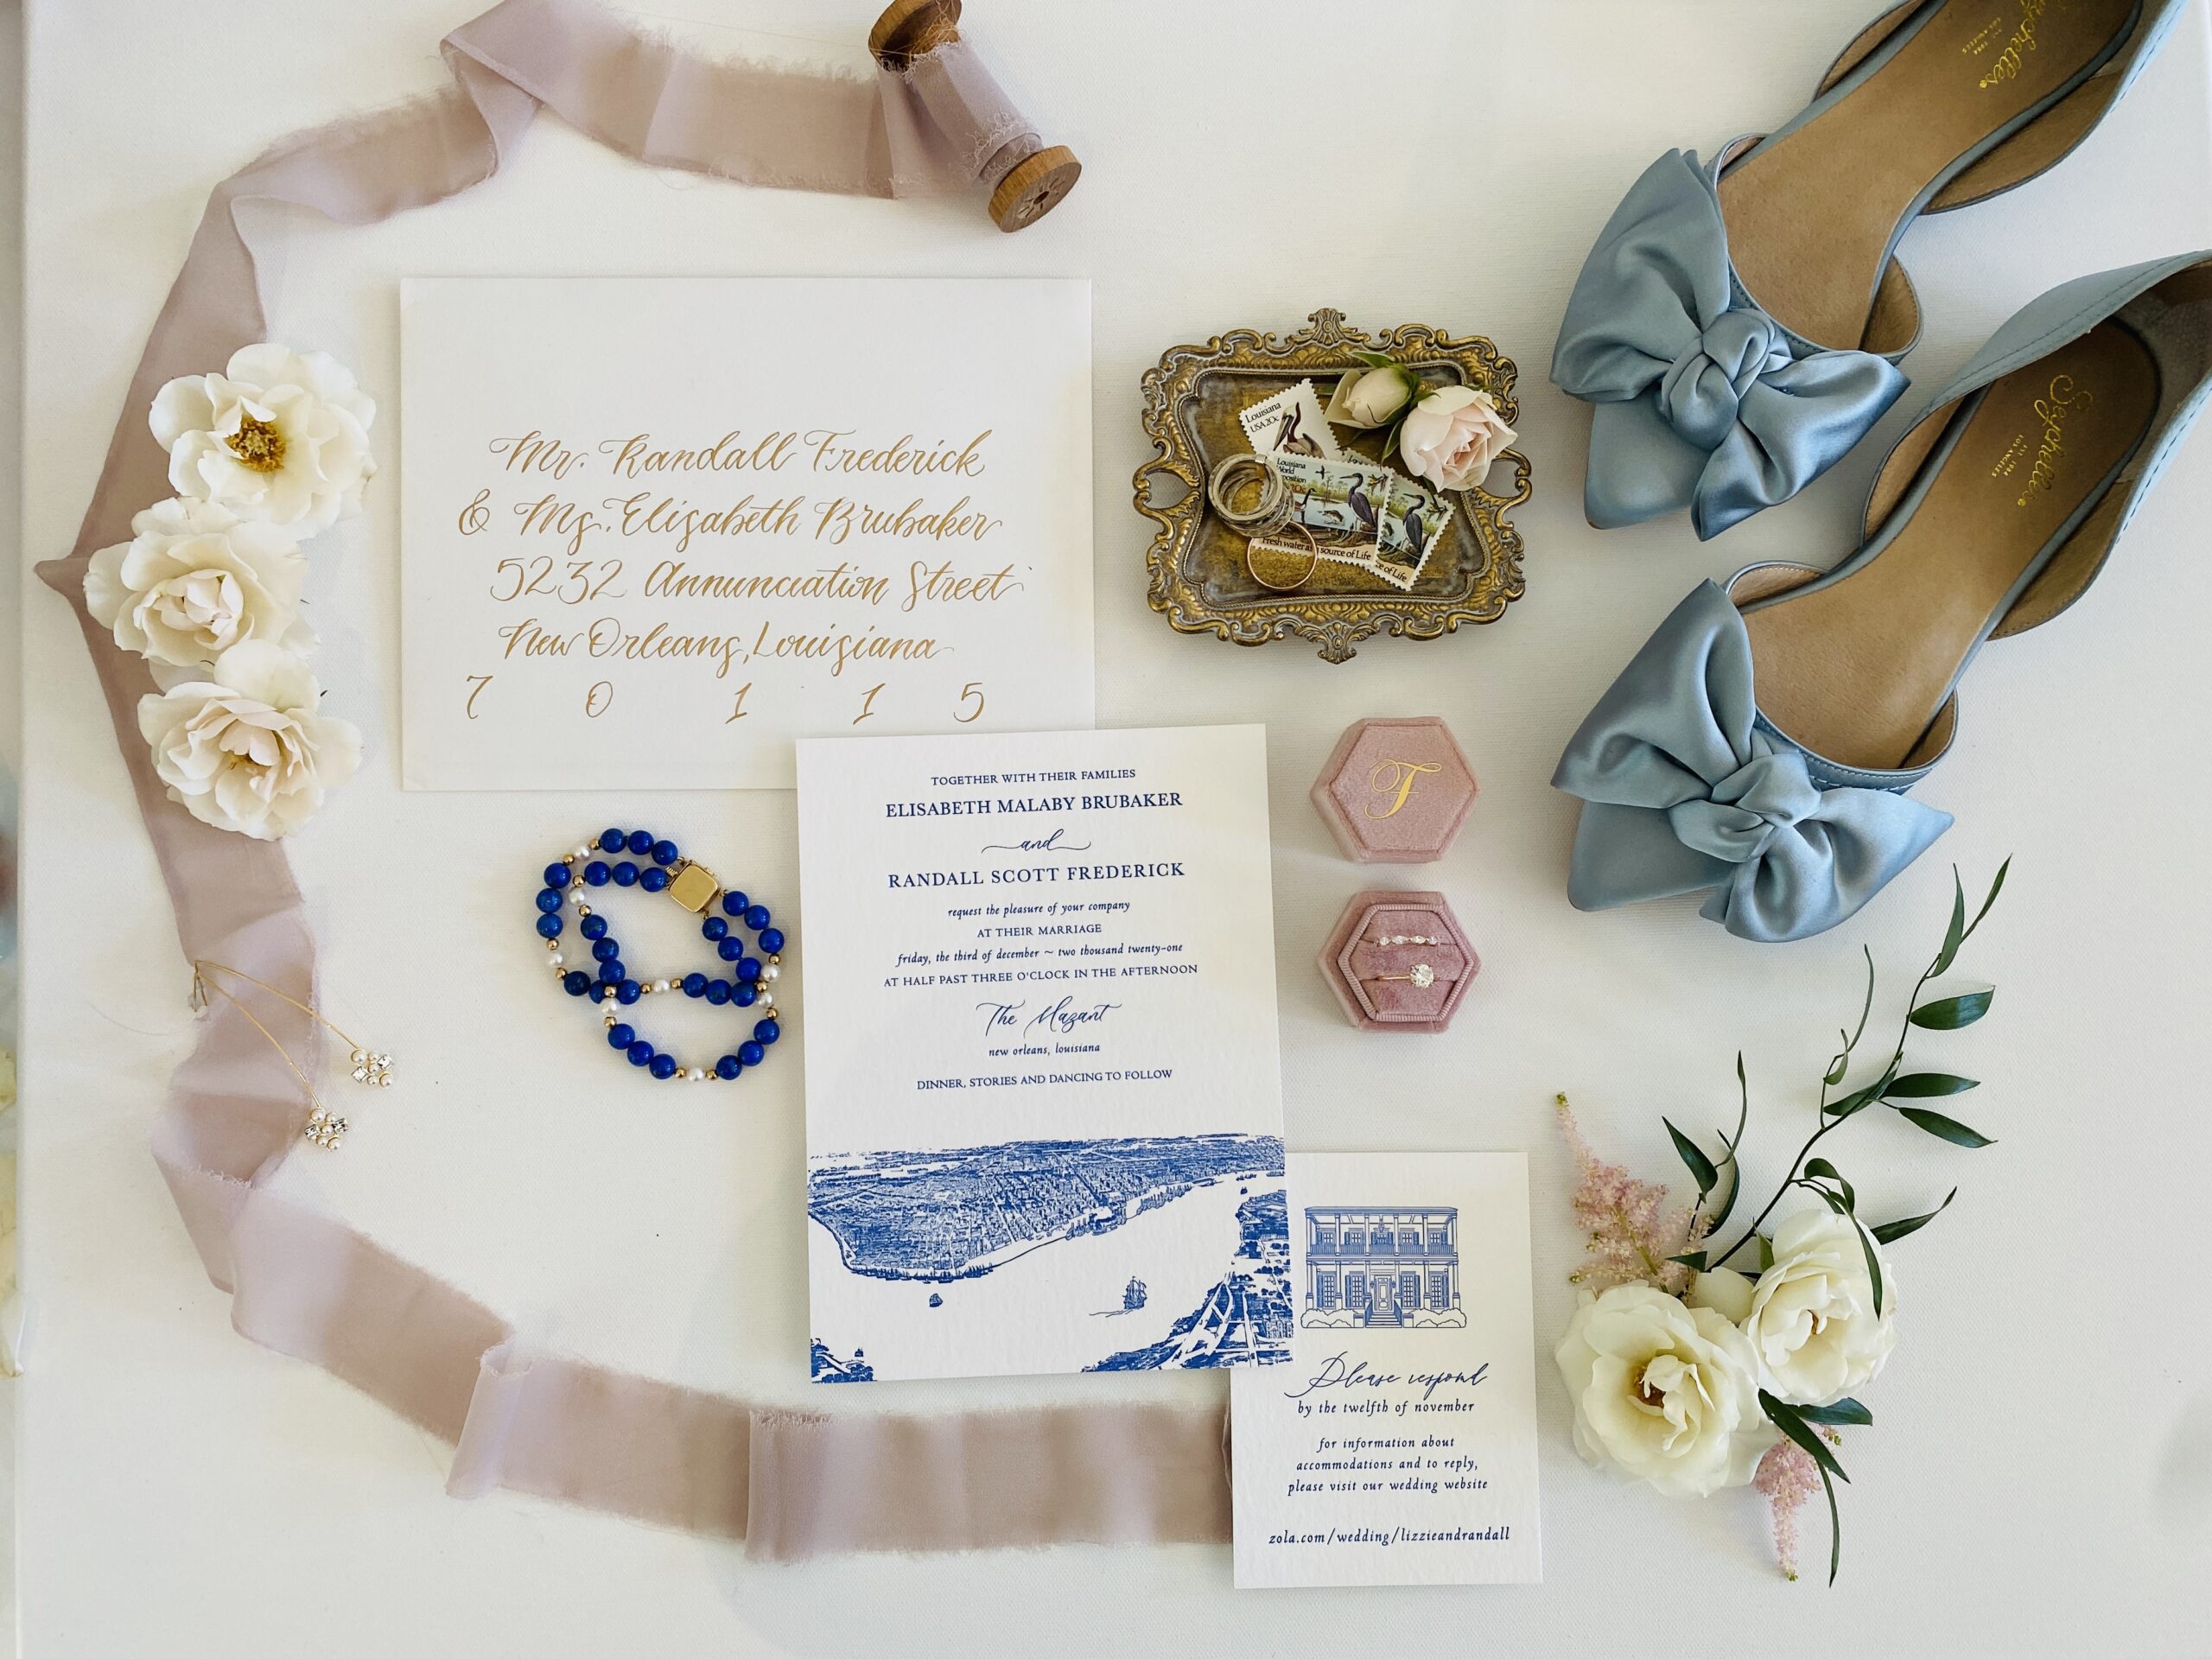 Falt lay picture of wedding invitations, something blue shoes, rings, and details